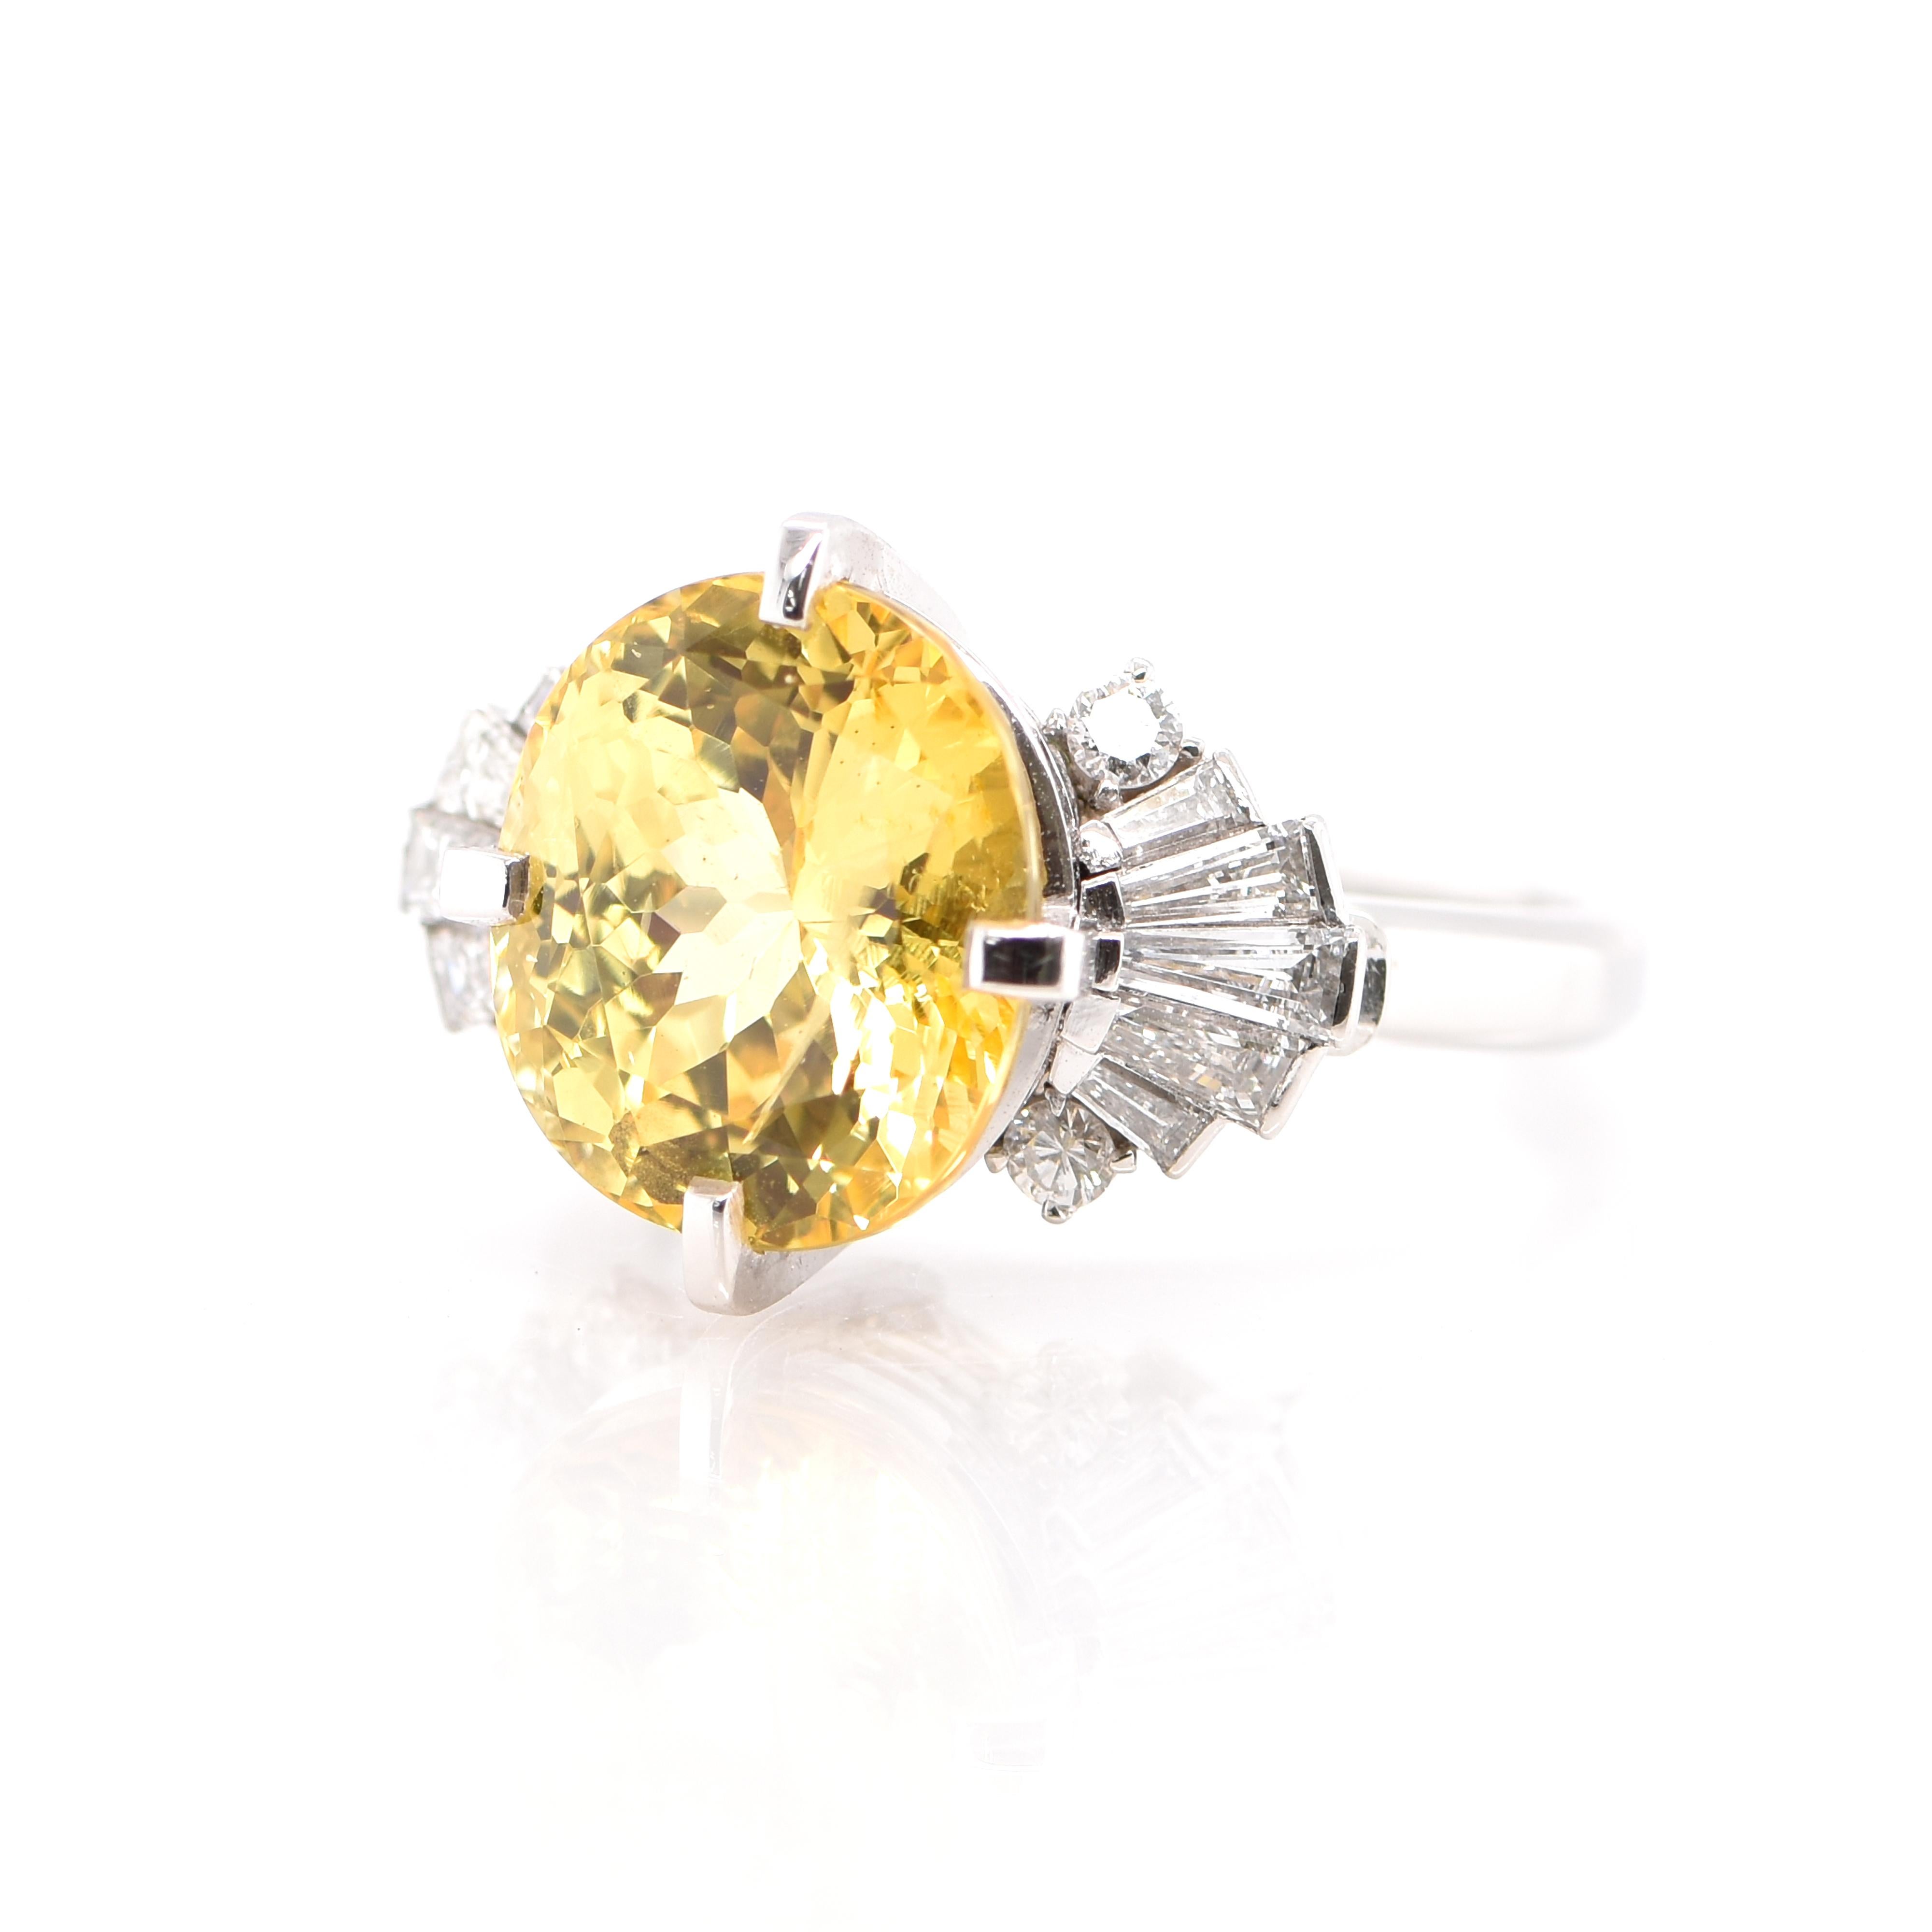 A stunning Cocktail Ring featuring a CGL Certified 6.93 Carat Untreated Yellow Sapphire and 0.61 Carats of Diamond Accents set in Platinum. Sapphires have extraordinary durability - they excel in hardness as well as toughness and durability making